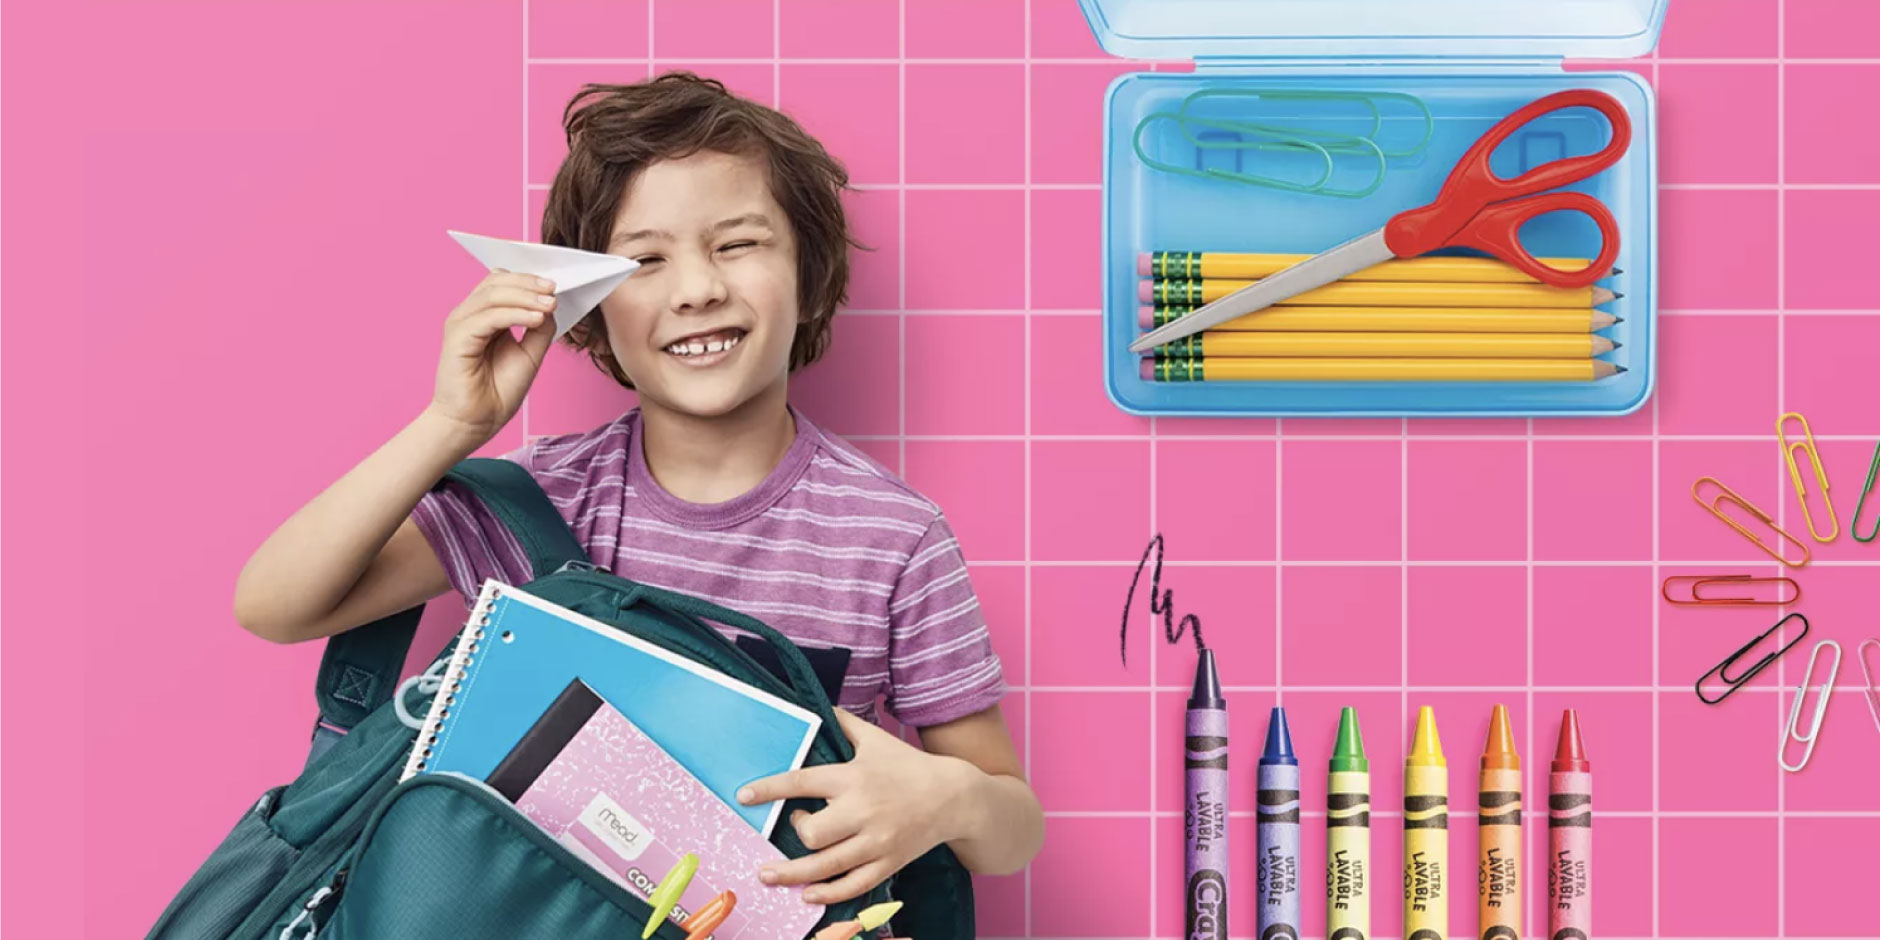 a boy holding a book and a pencil in his hand